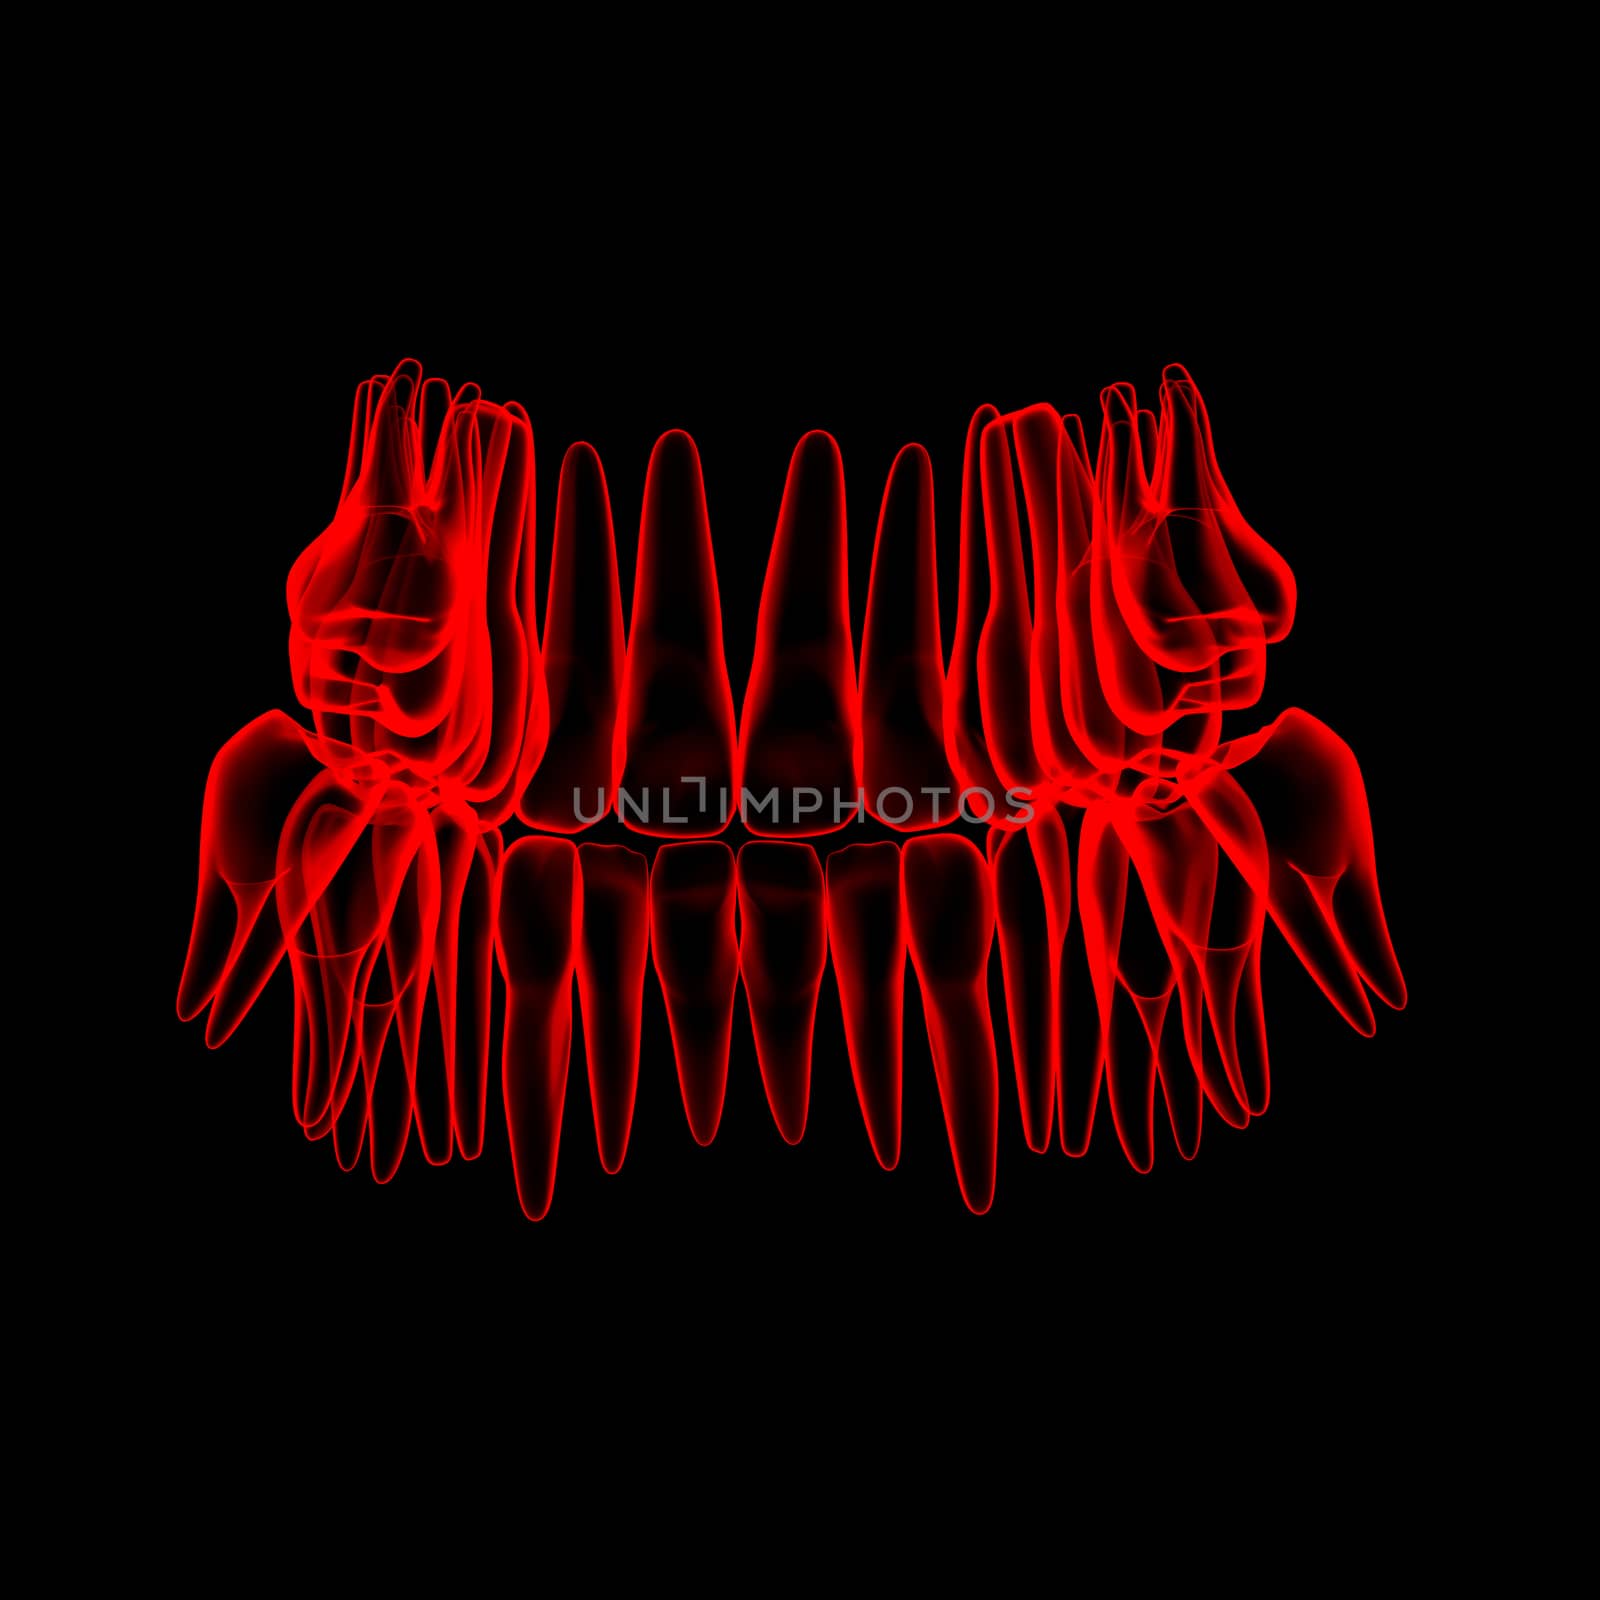 3d human red teeth - back view